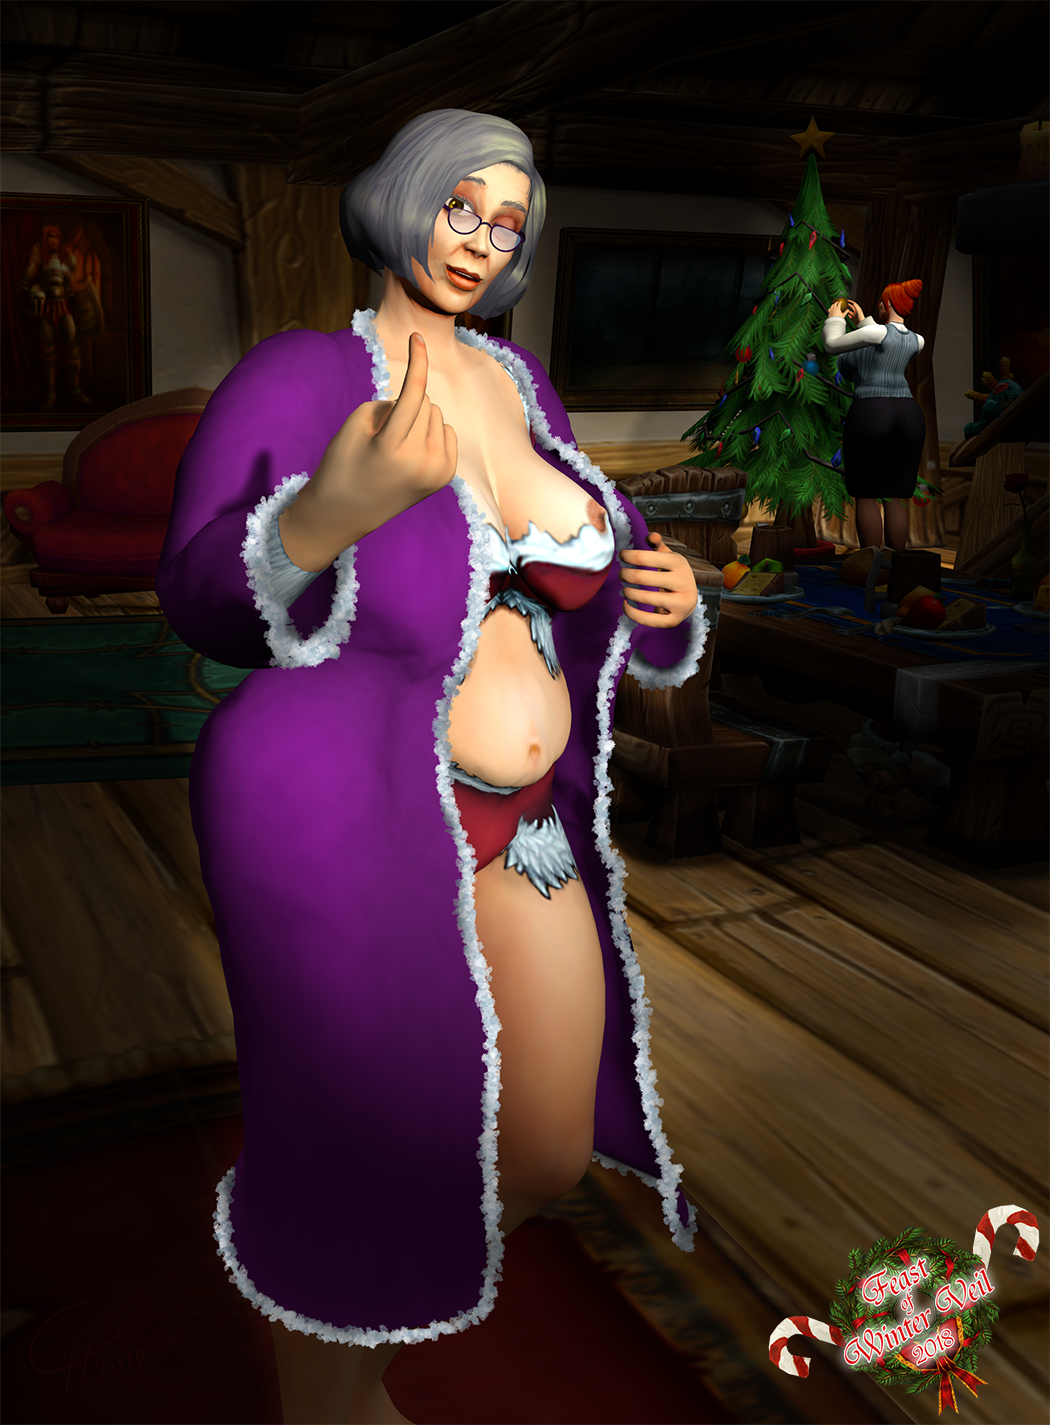 Winter Veil 2018: Gift Three [Human/Pinup/NPC]
Winter Veil is closing and Emma Felstone,
also known as Ol' Emma, is getting into festive mood
and she's getting help with the decorations from a
charity group - giving her ample time treat her guests.
[b][url=http://bakaras.com/murlocish/albums/userpics/10001/2018Xmas3picXL.png]==XL-Size Edit==[/url][b]
Keywords: NPC;Human;Pinup;OlEmma;gilf